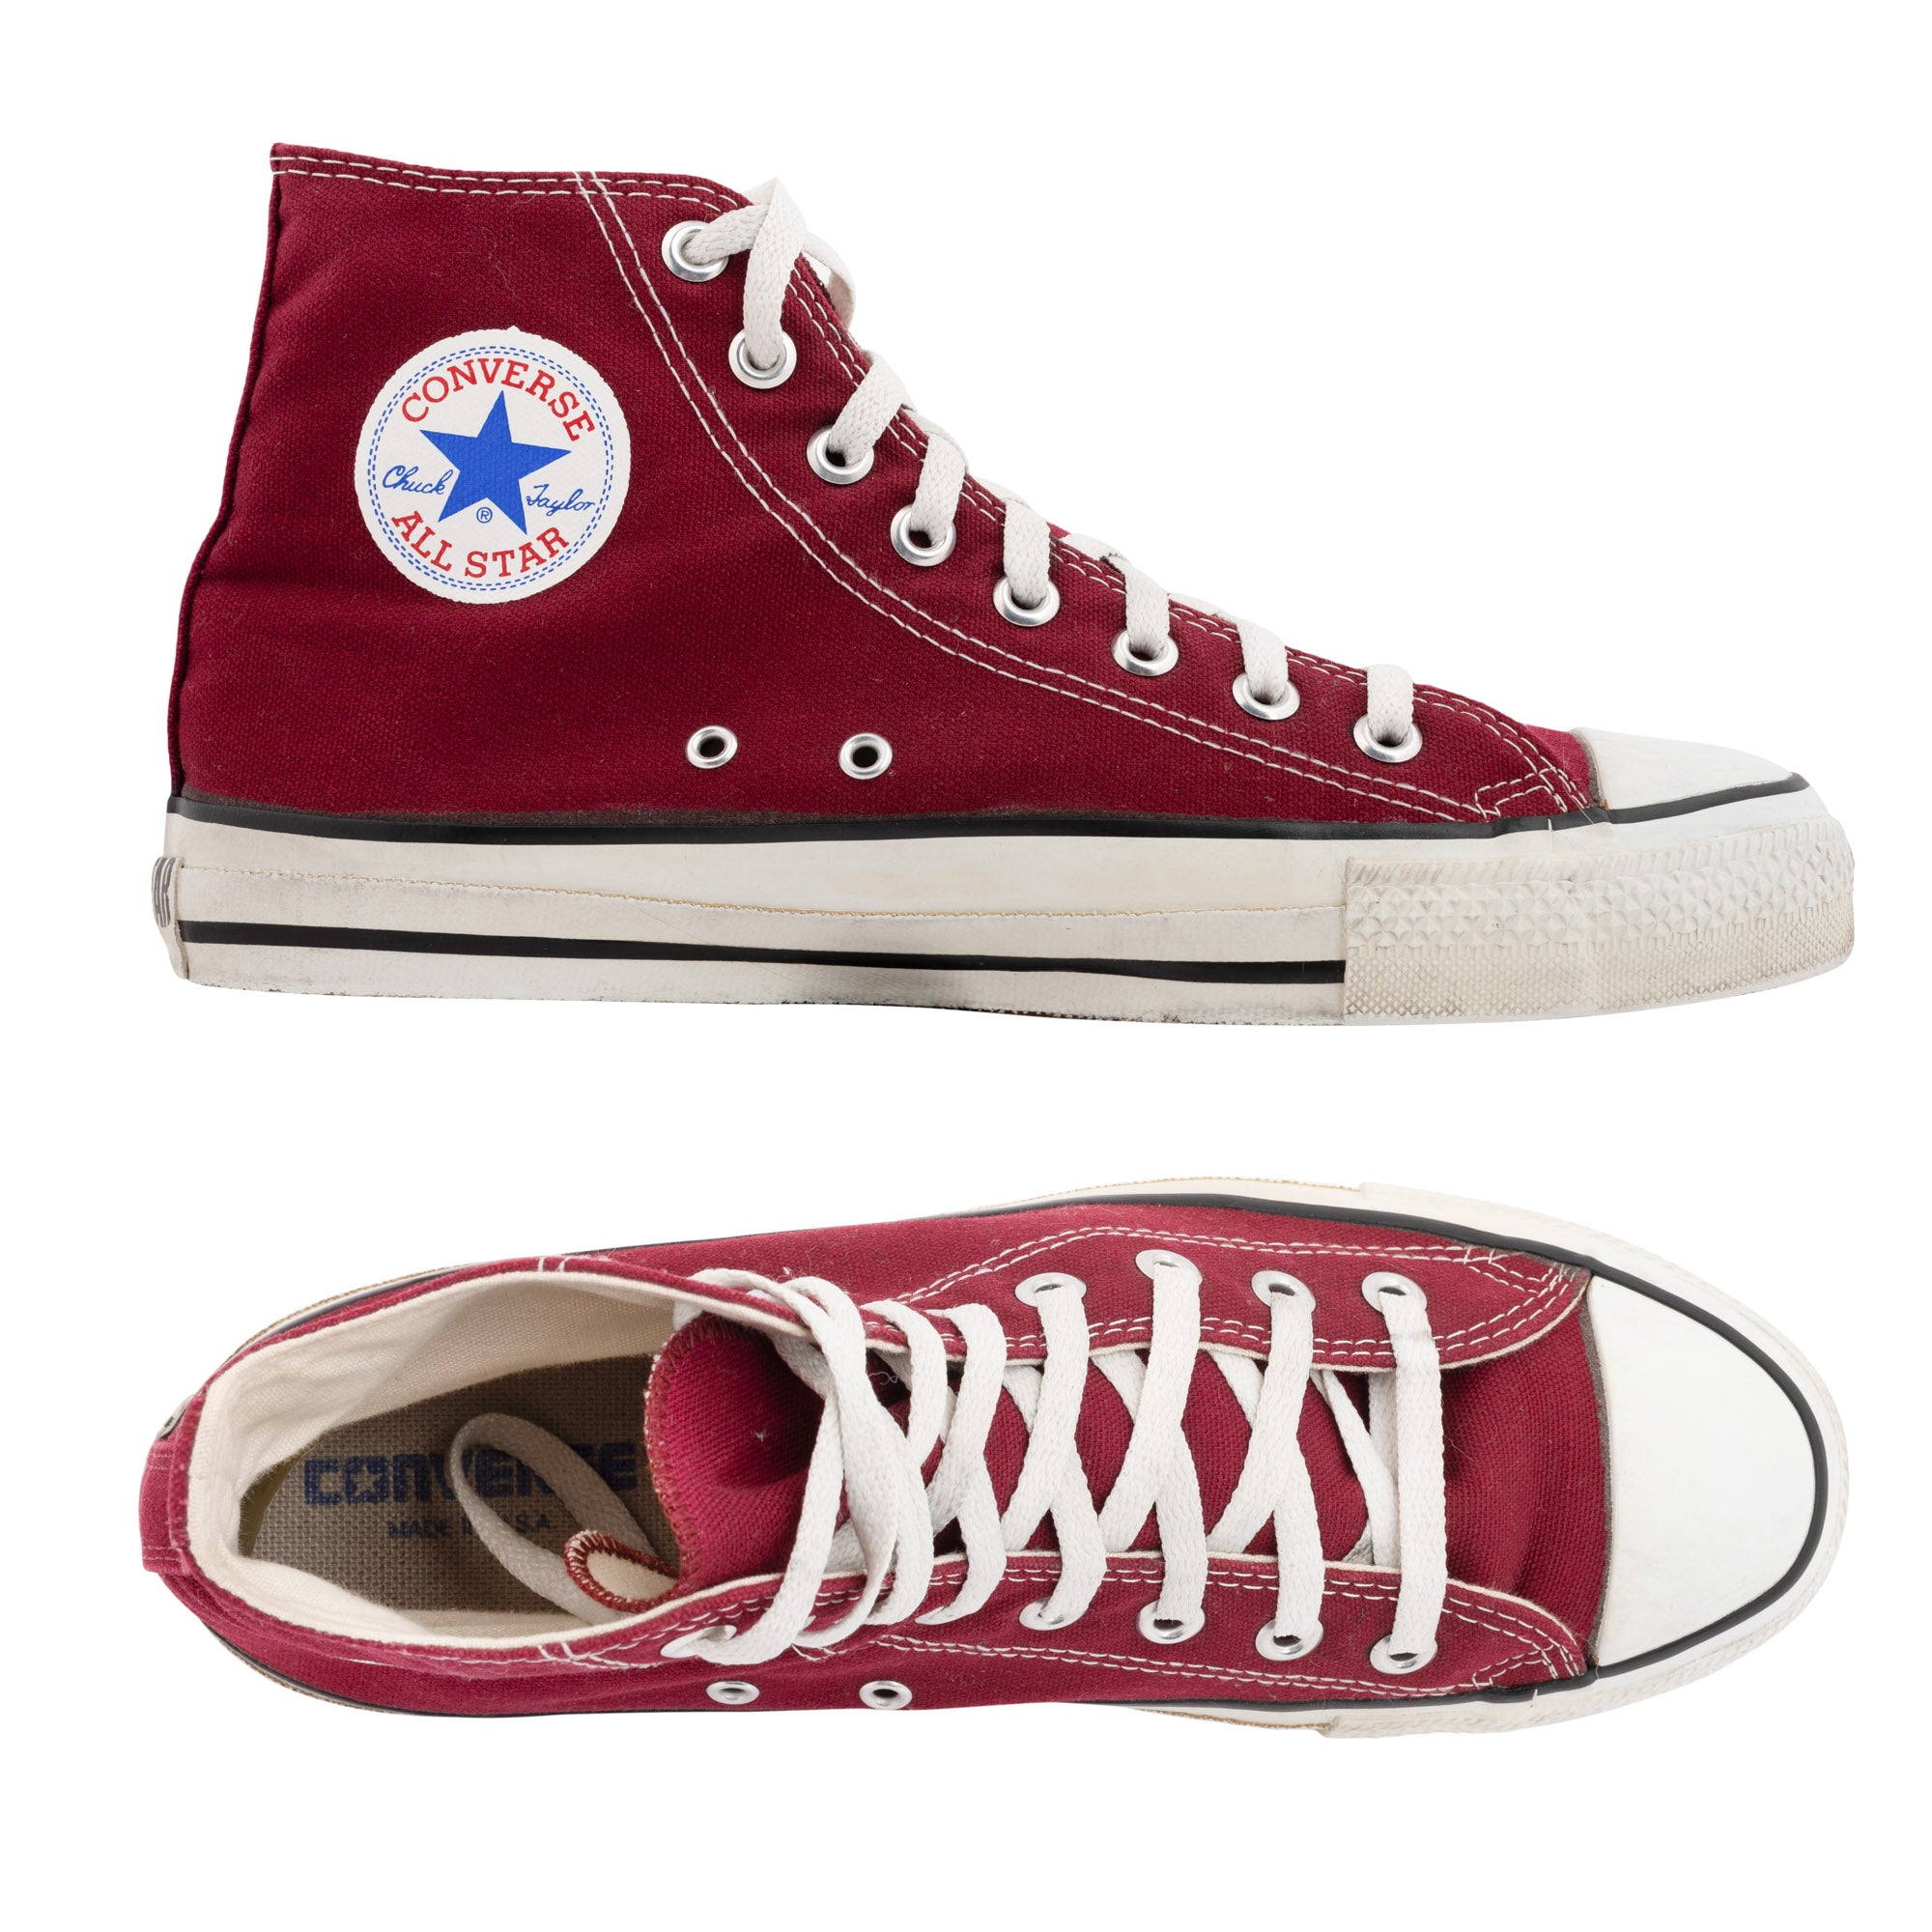 converse shoes made in usa